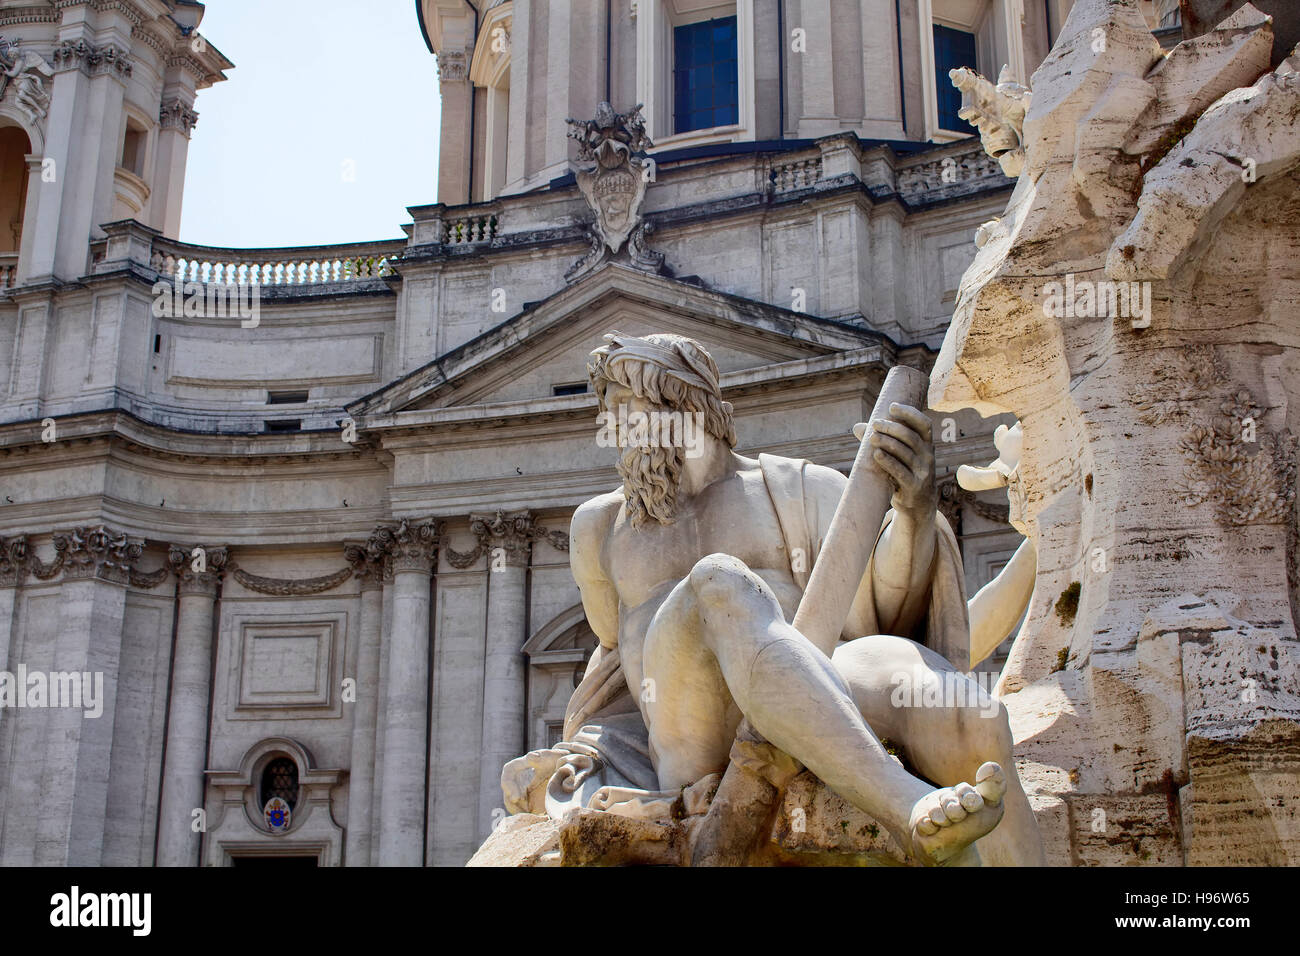 Close up view of a sculpture on Piazza Navona in Rome. Stock Photo